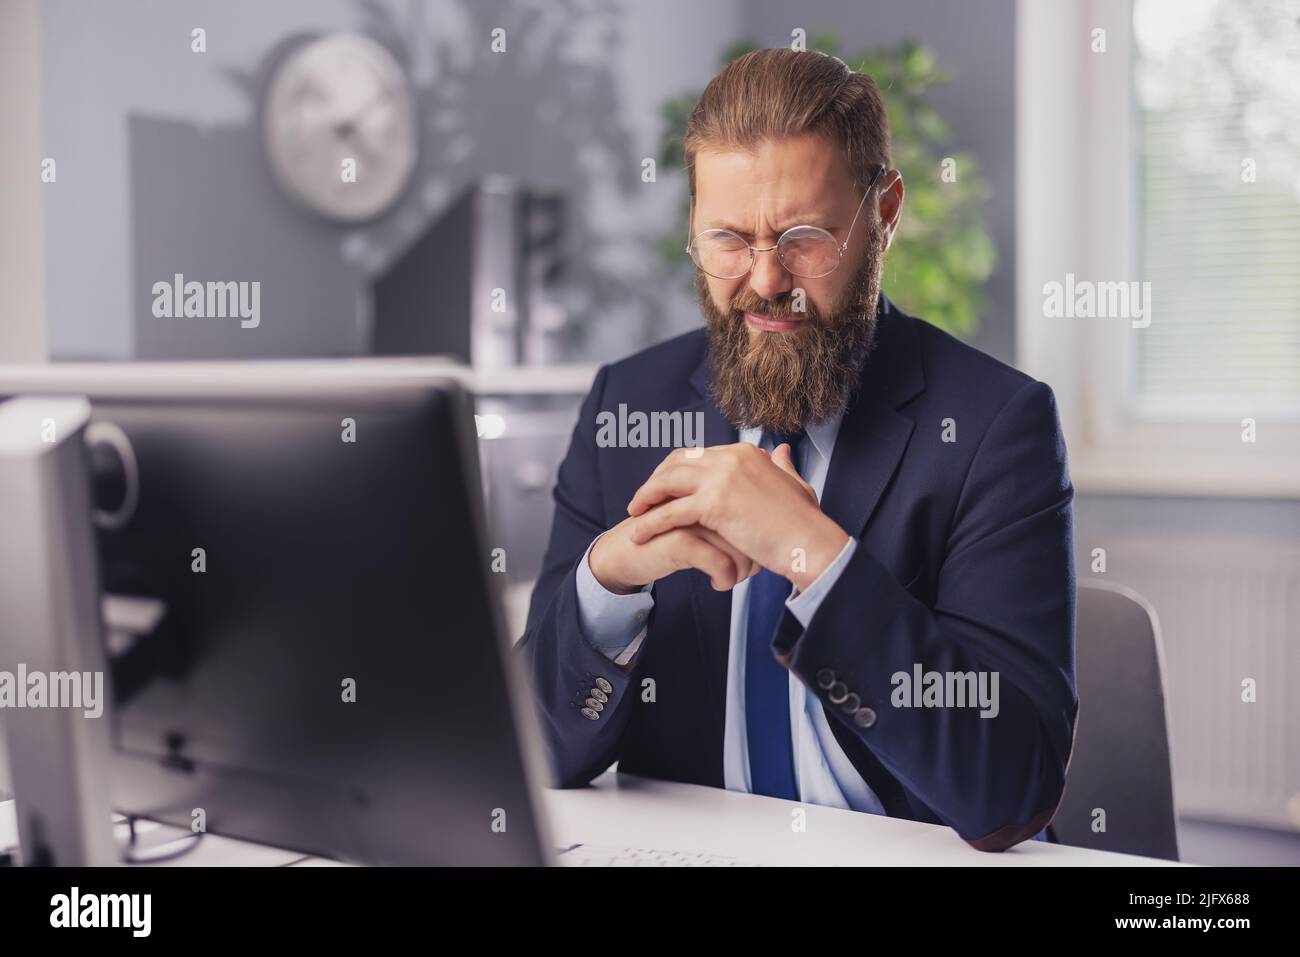 Businessman with wry grimace Stock Photo